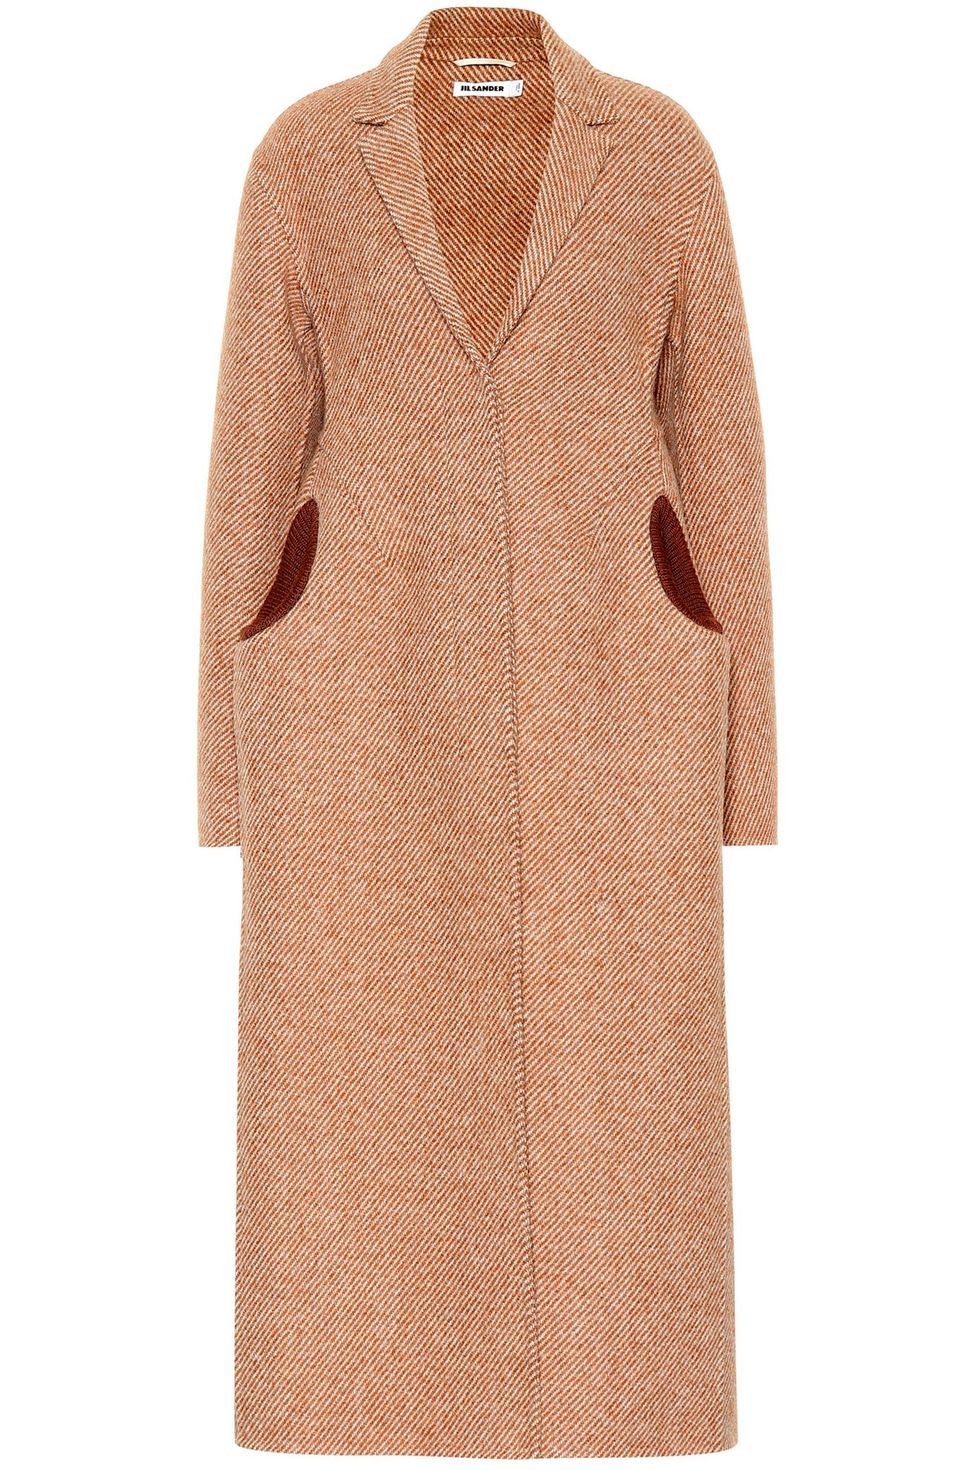 Clothing, Outerwear, Dress, Sleeve, Brown, Coat, Day dress, Beige, Robe, Overcoat, 